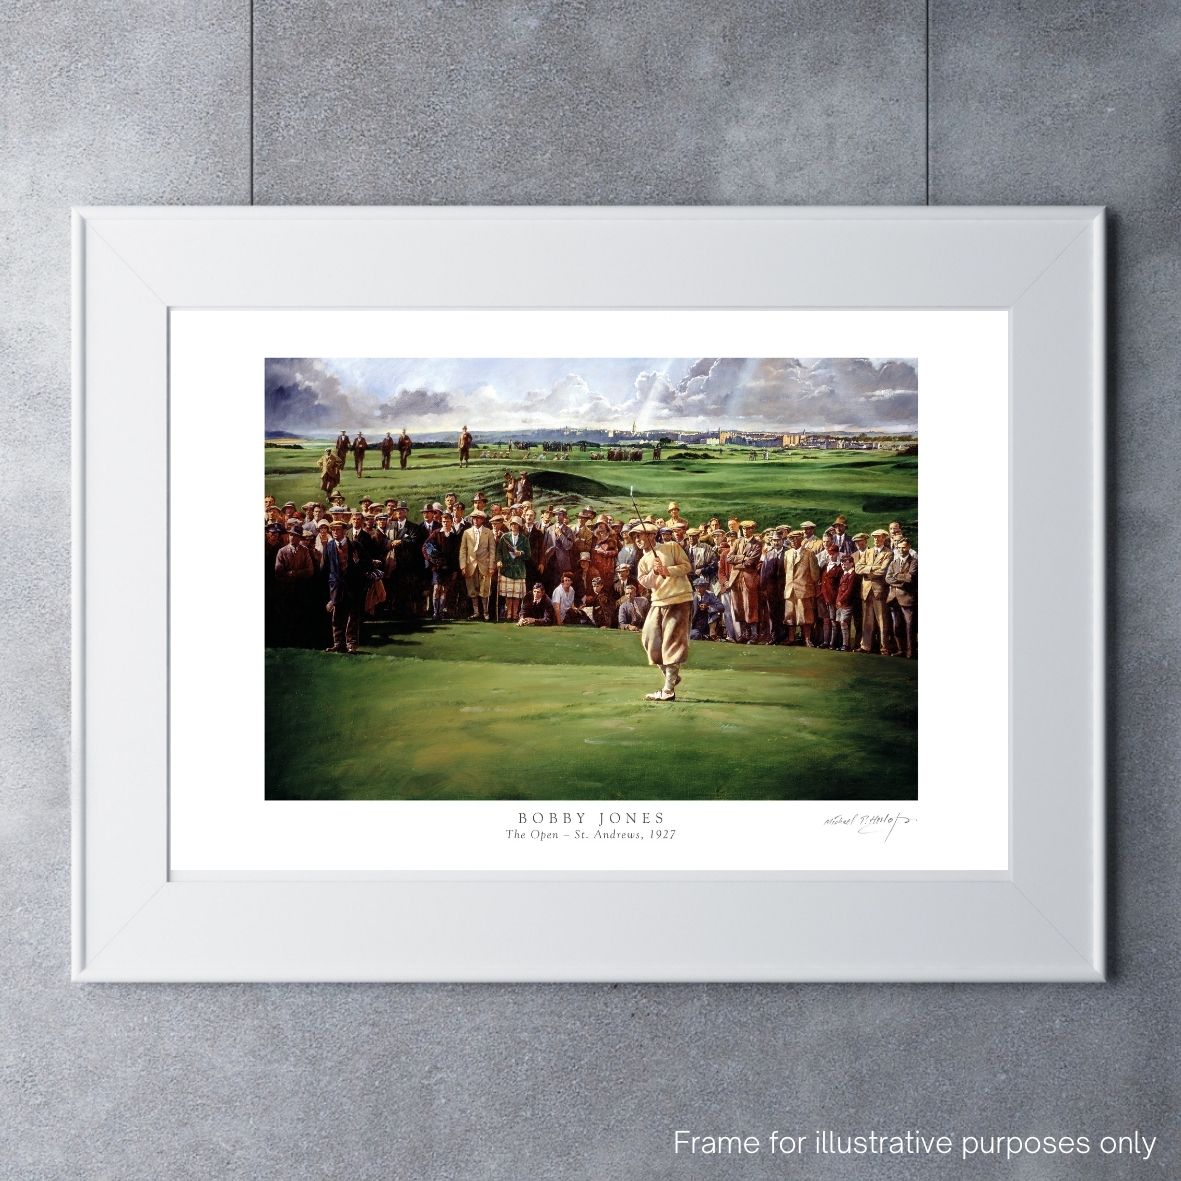 Bobby Jones, The Open at St Andrews, 1927 by Michael Heslop